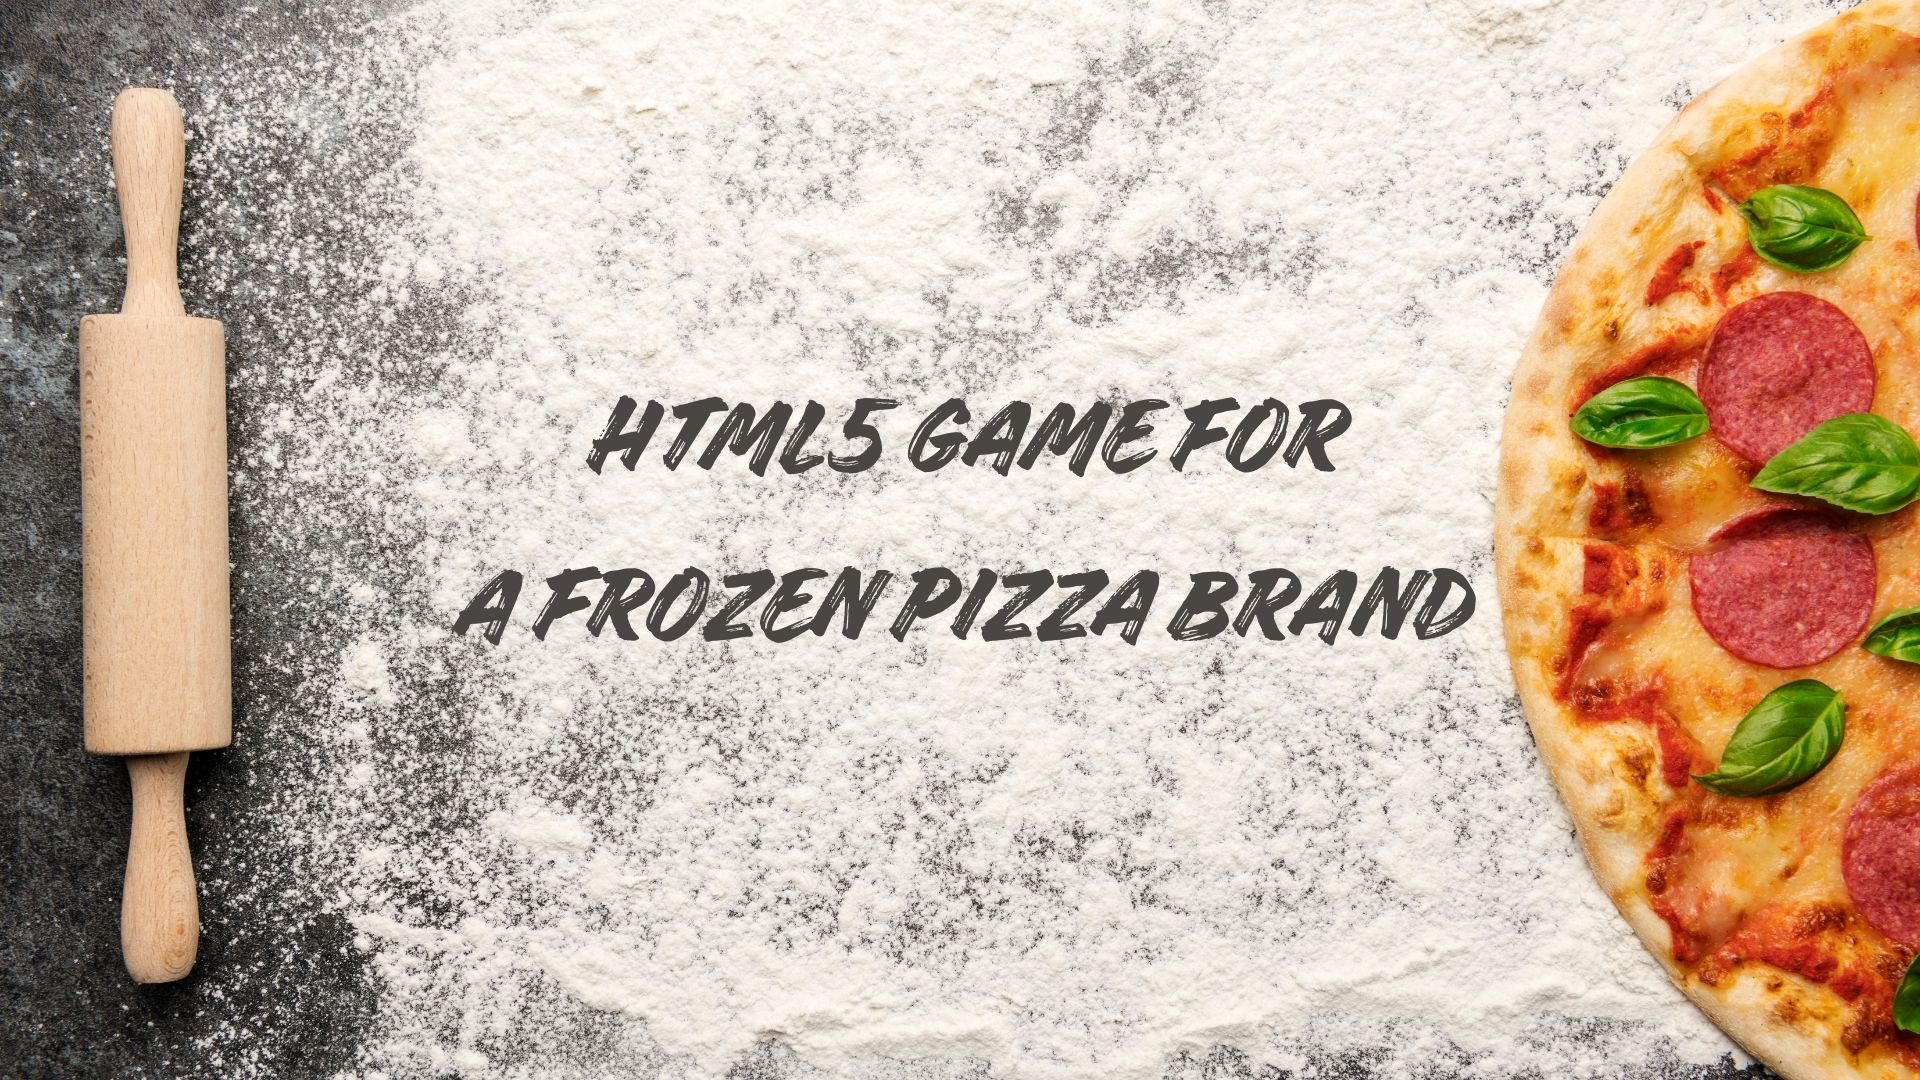 HTML5 Game For A Frozen Pizza Brand